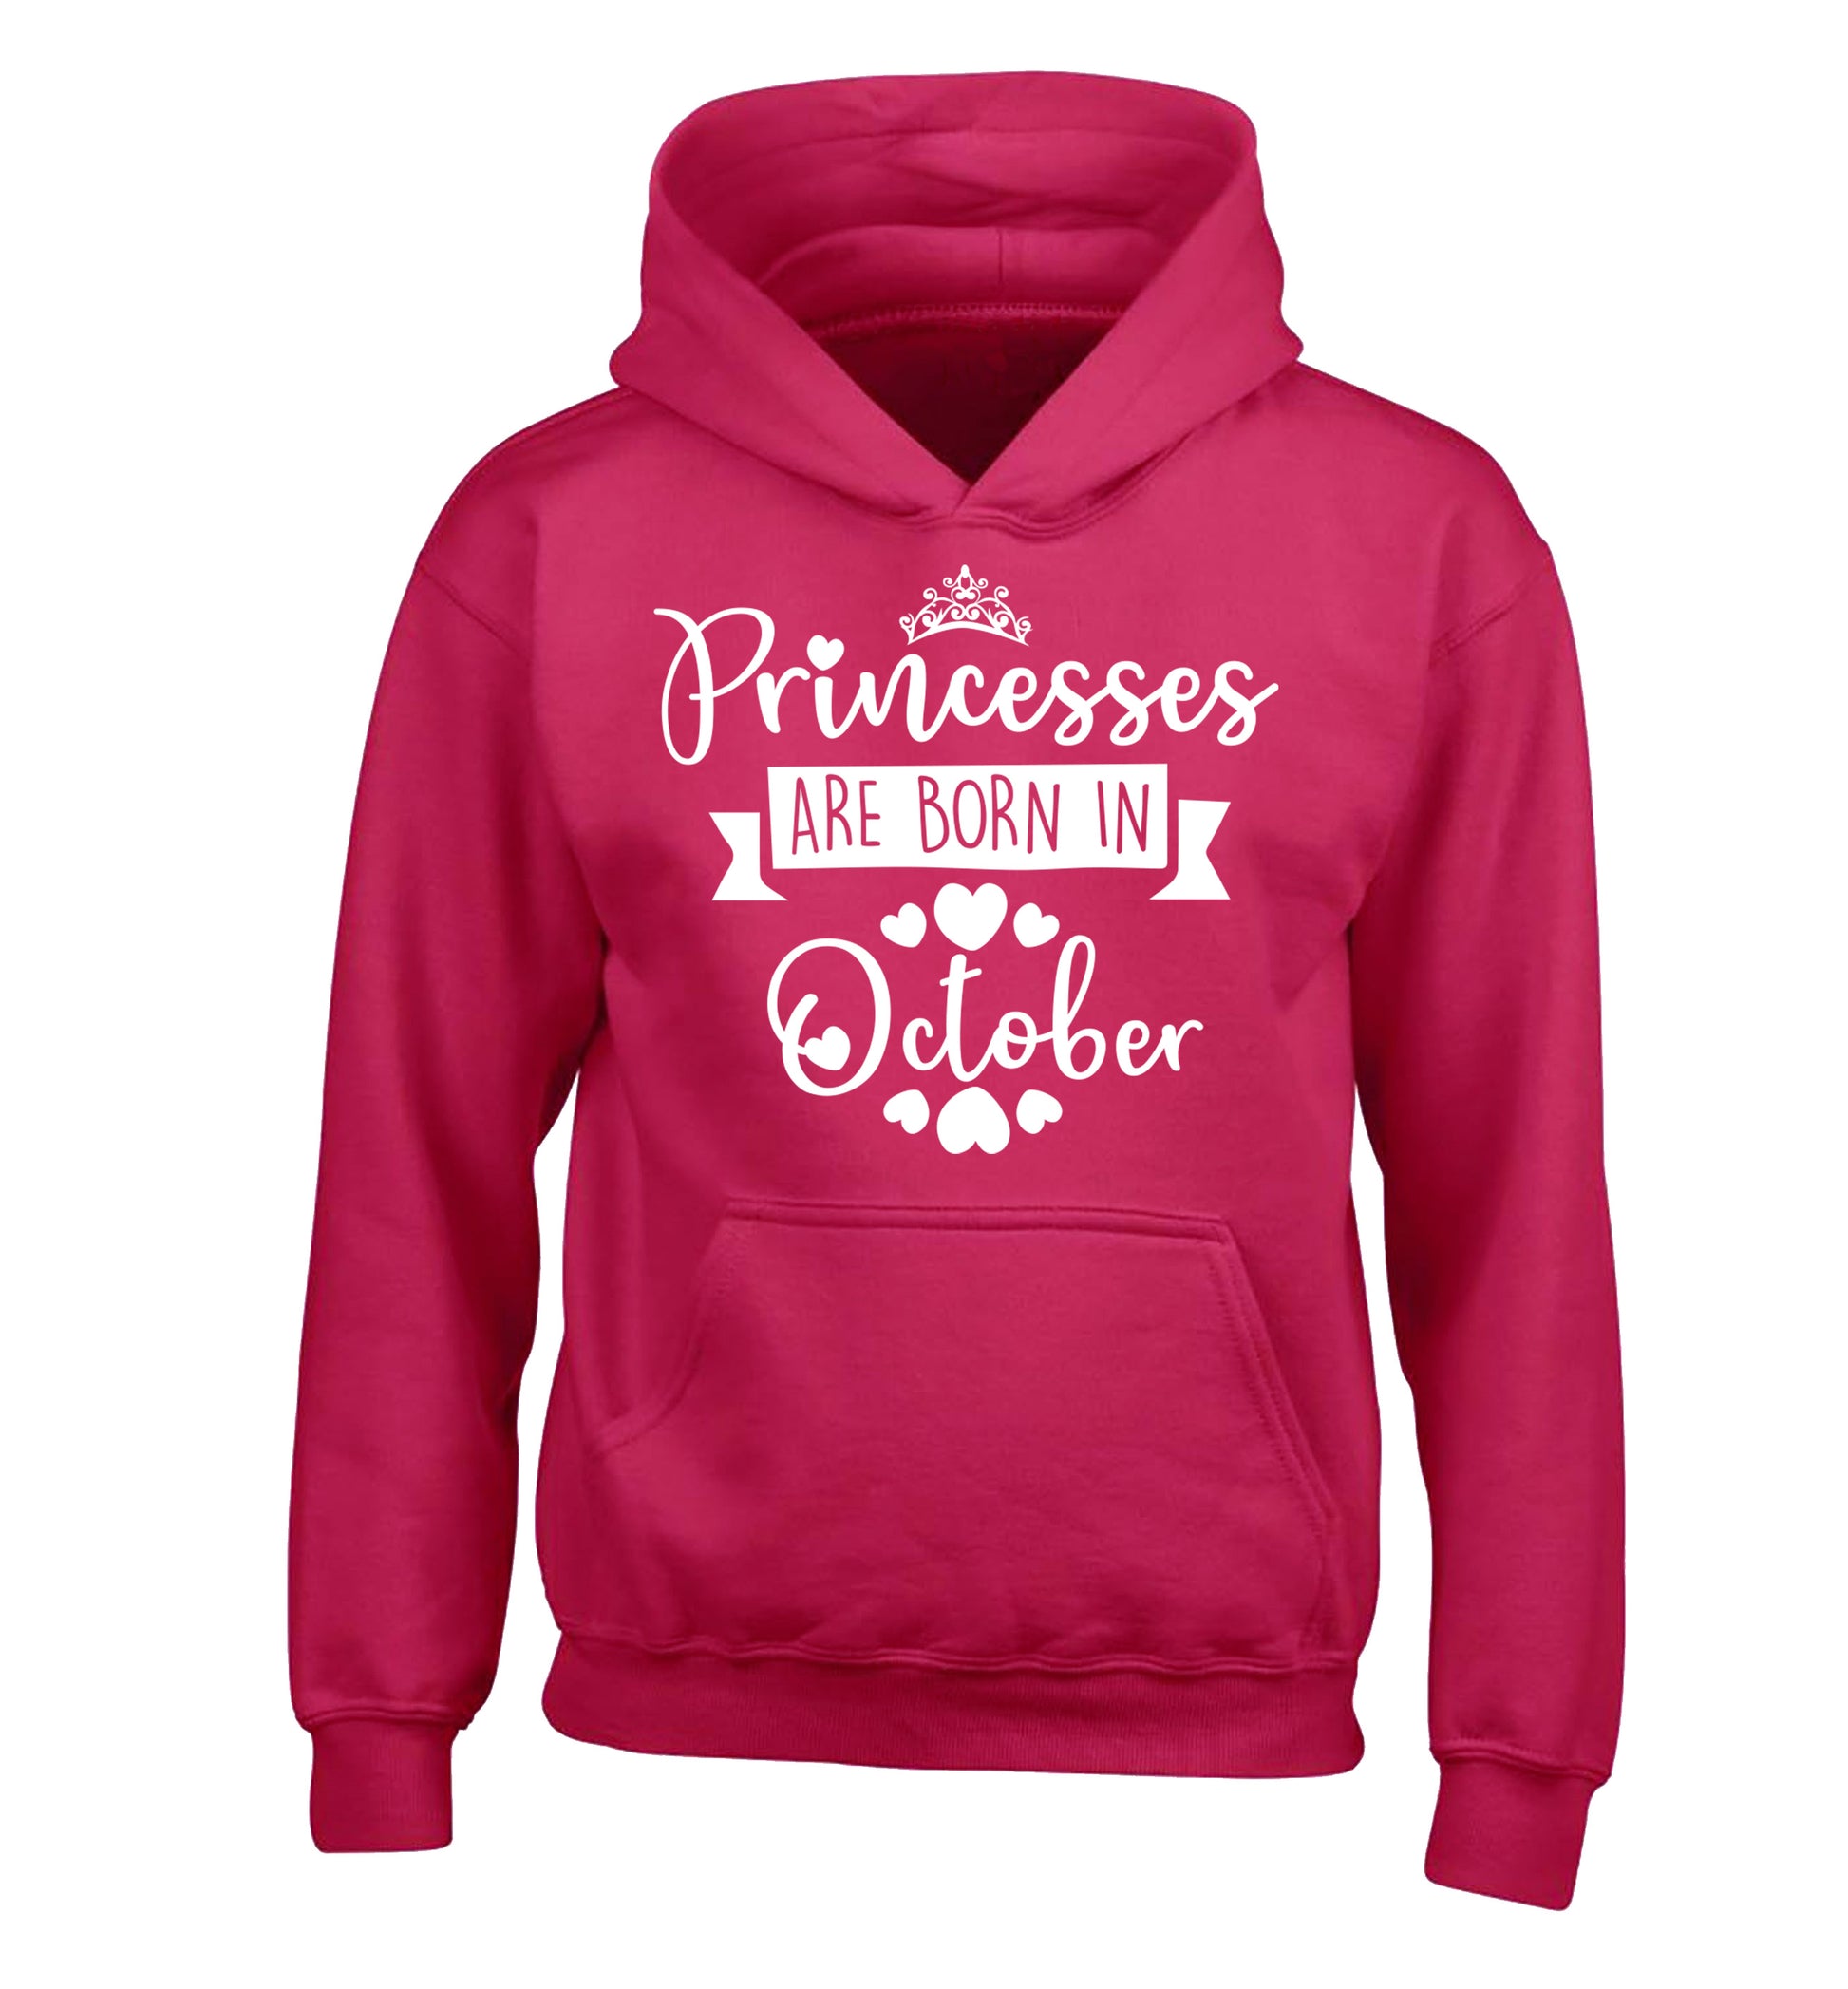 Princesses are born in October children's pink hoodie 12-13 Years